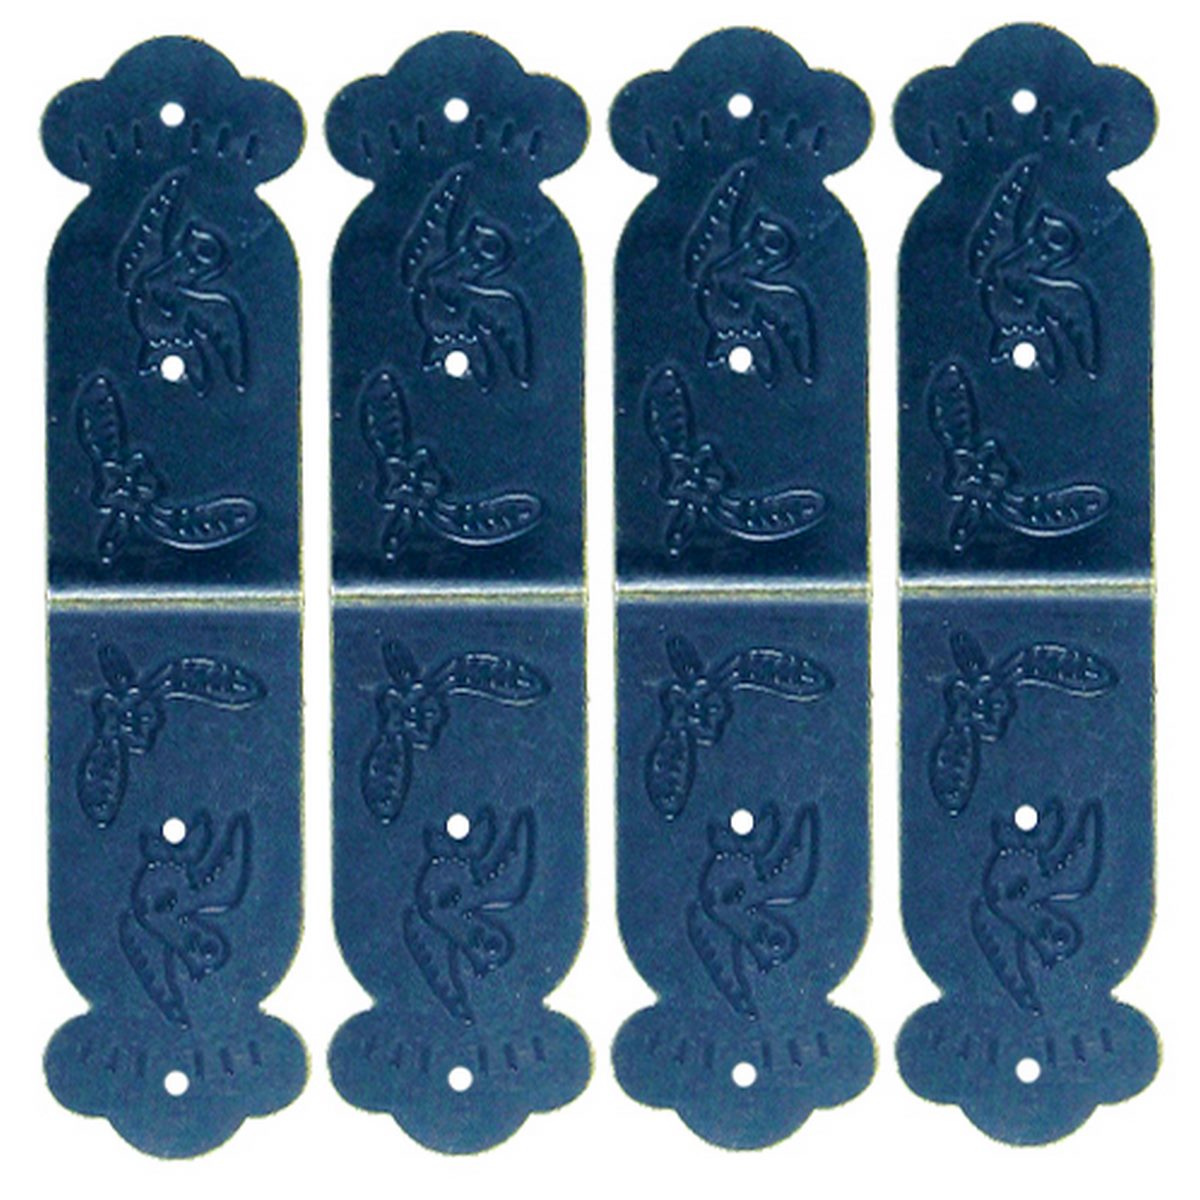 jags-mumbai Pendant "Craft Fitting Corner Side Metal 4pcs CB074 - Perfect for Sturdy and Elegant Craft Projects"